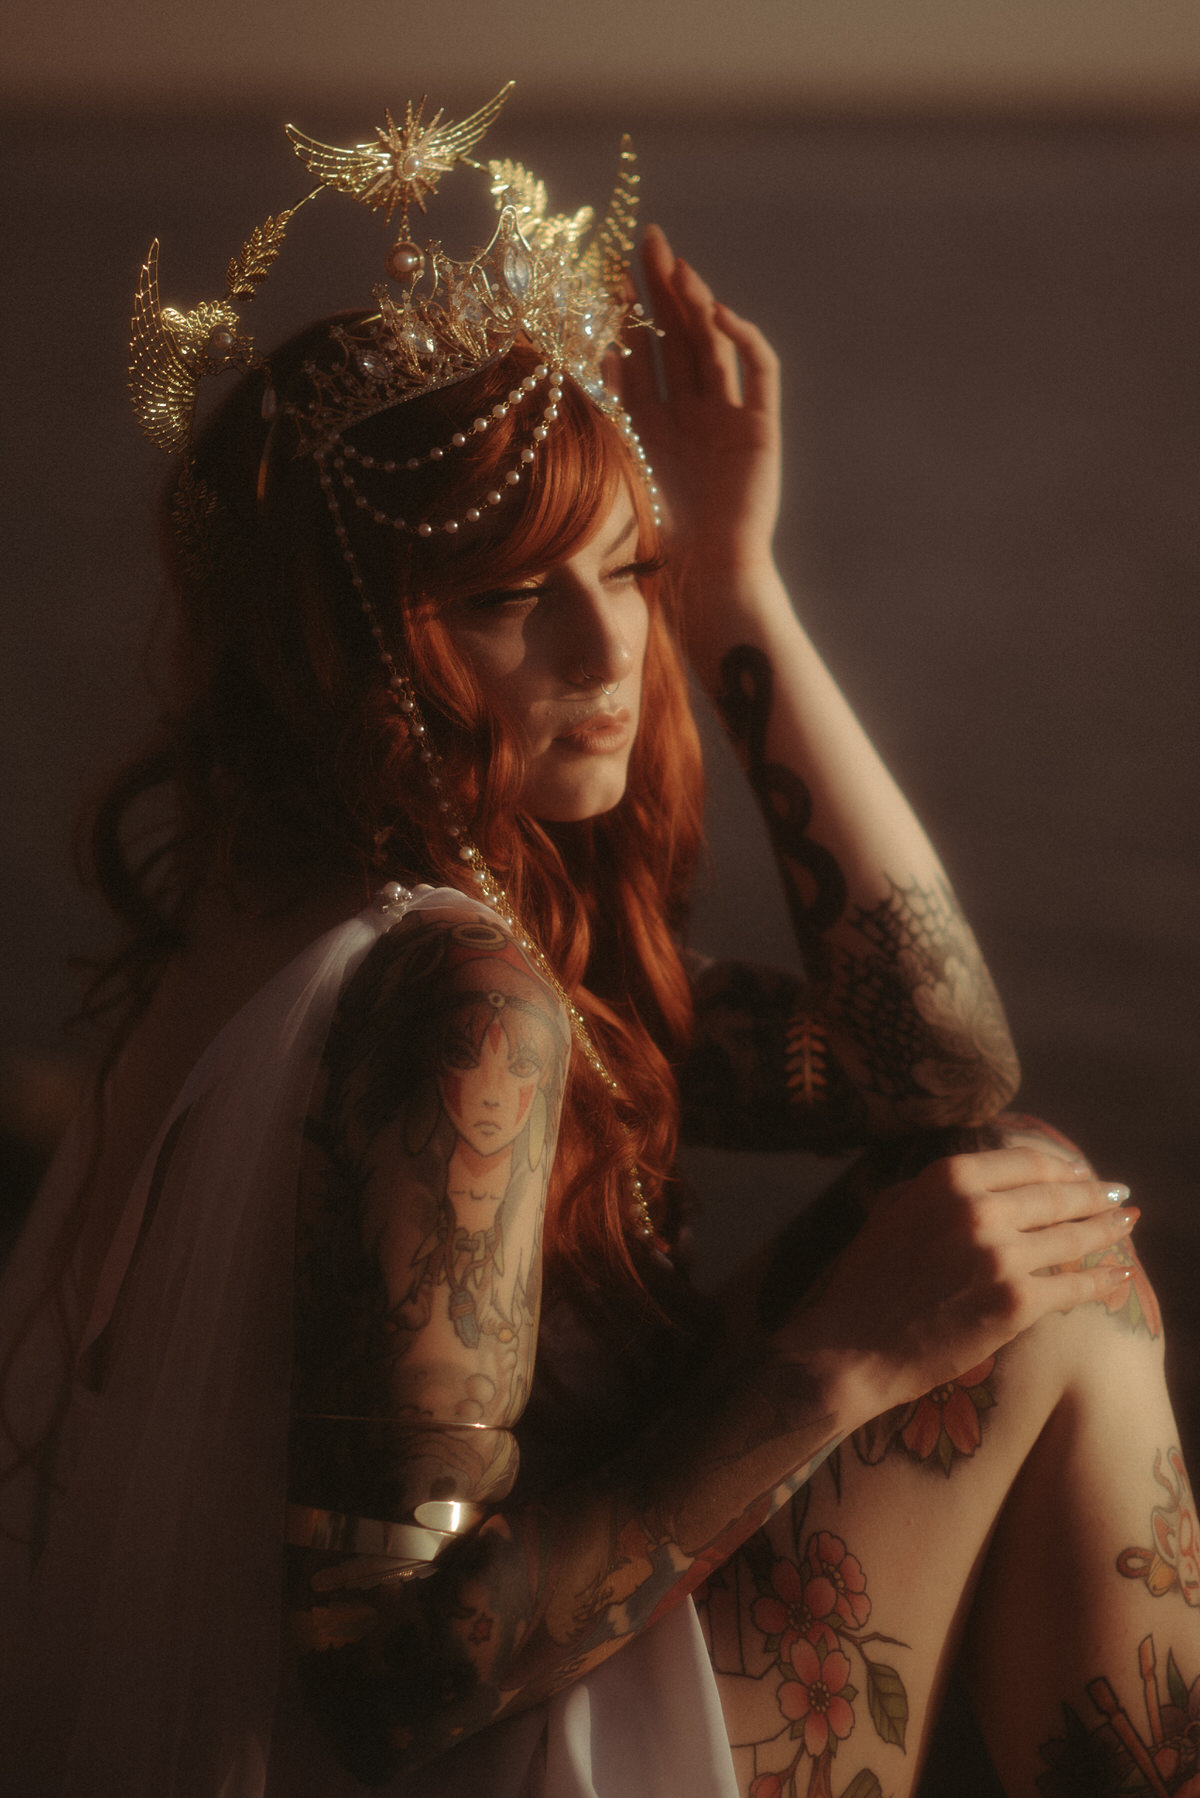 Beautiful woman with tattoos with red hair wearing a gold crown.